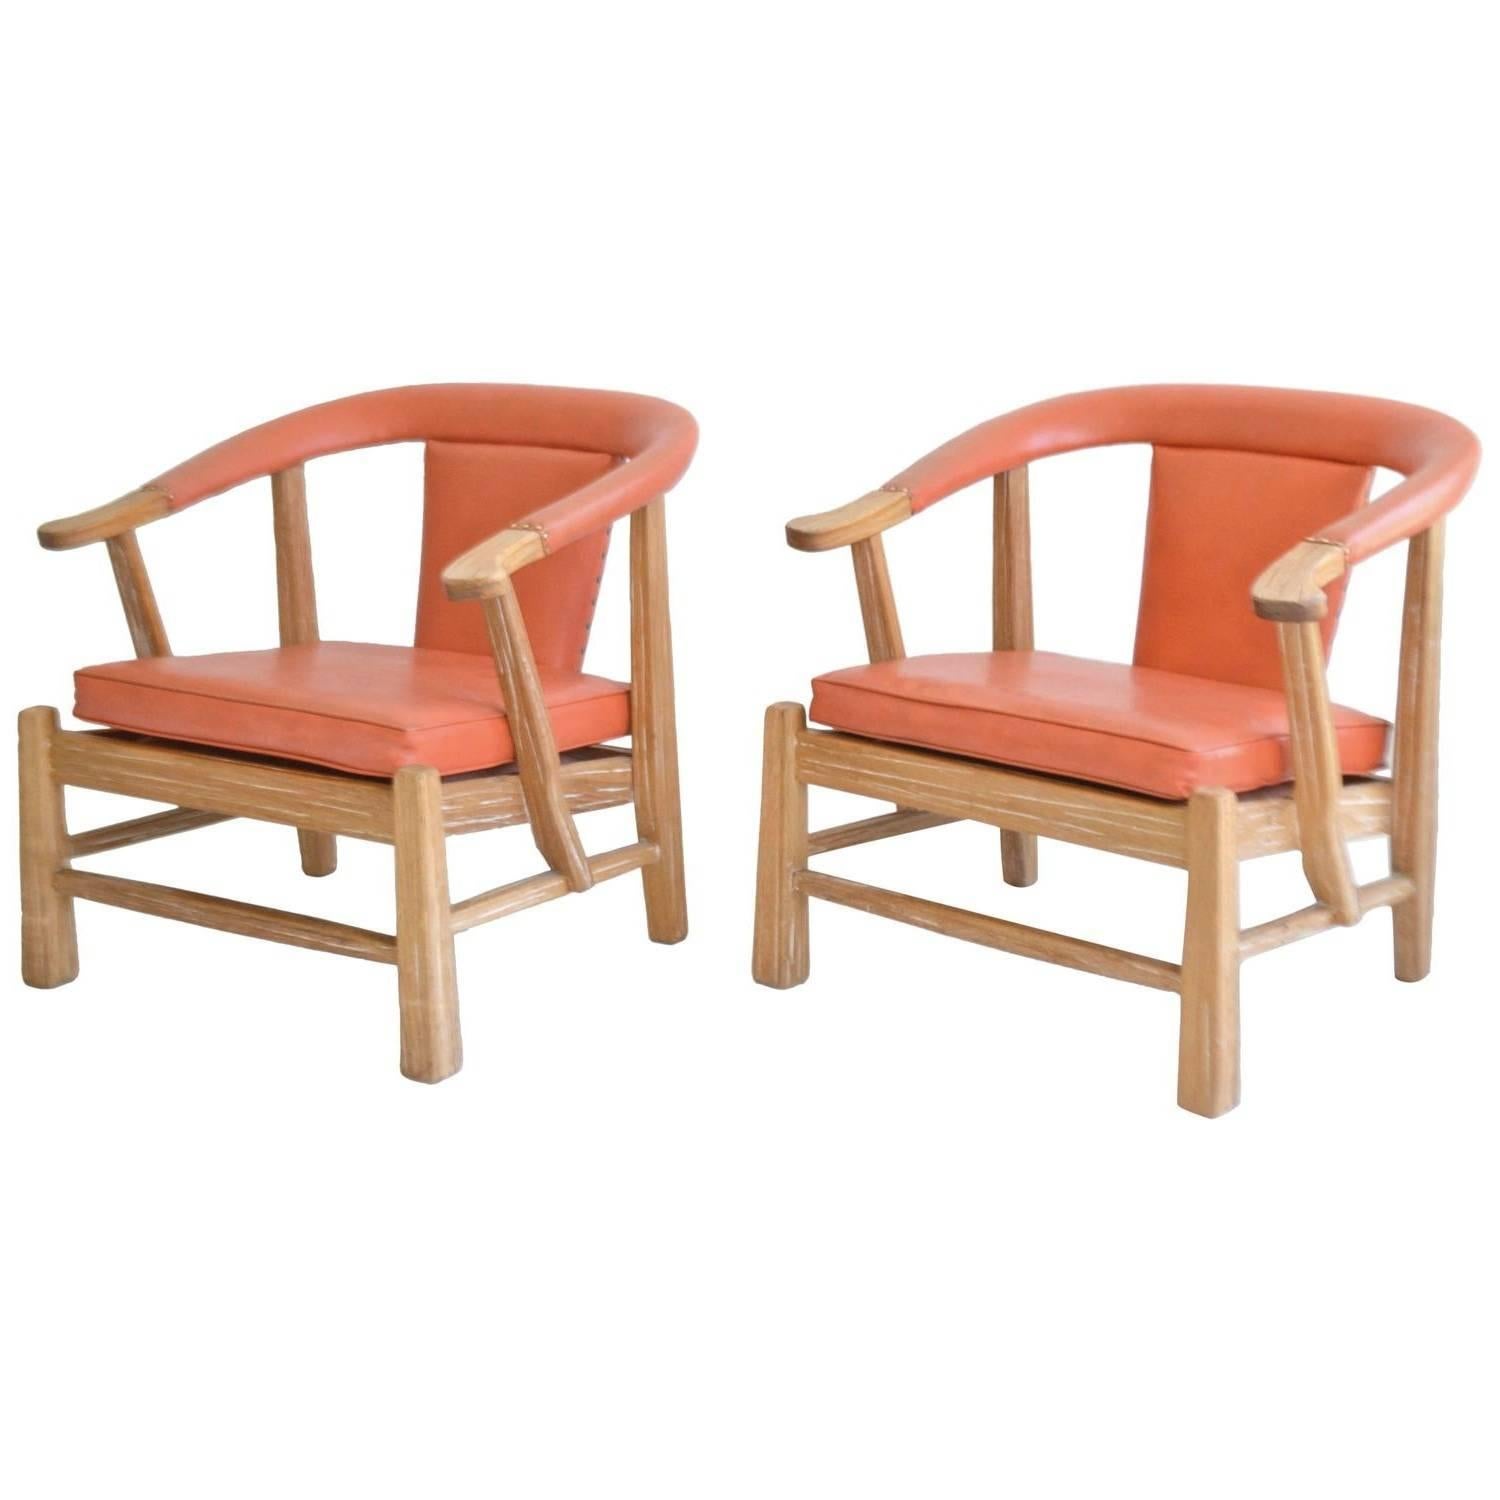 Pair of Midcentury Asian Inspired Club Chairs / Lounge Chairs For Sale